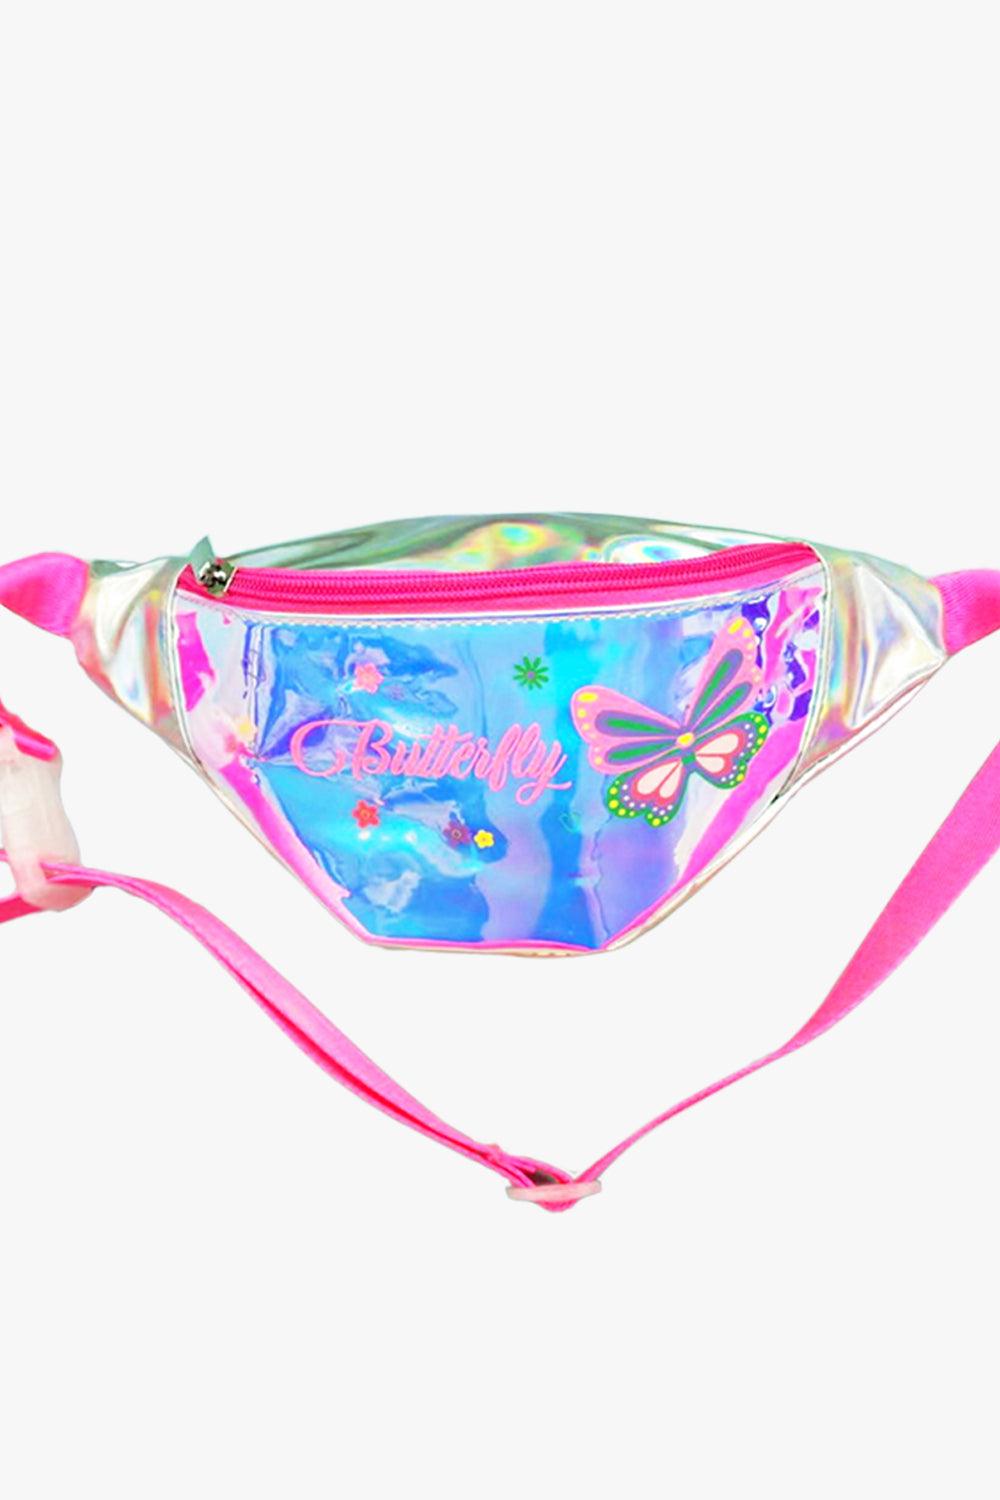 Pink Strap Butterfly Kidcore Waist Bag - Aesthetic Clothes Shop